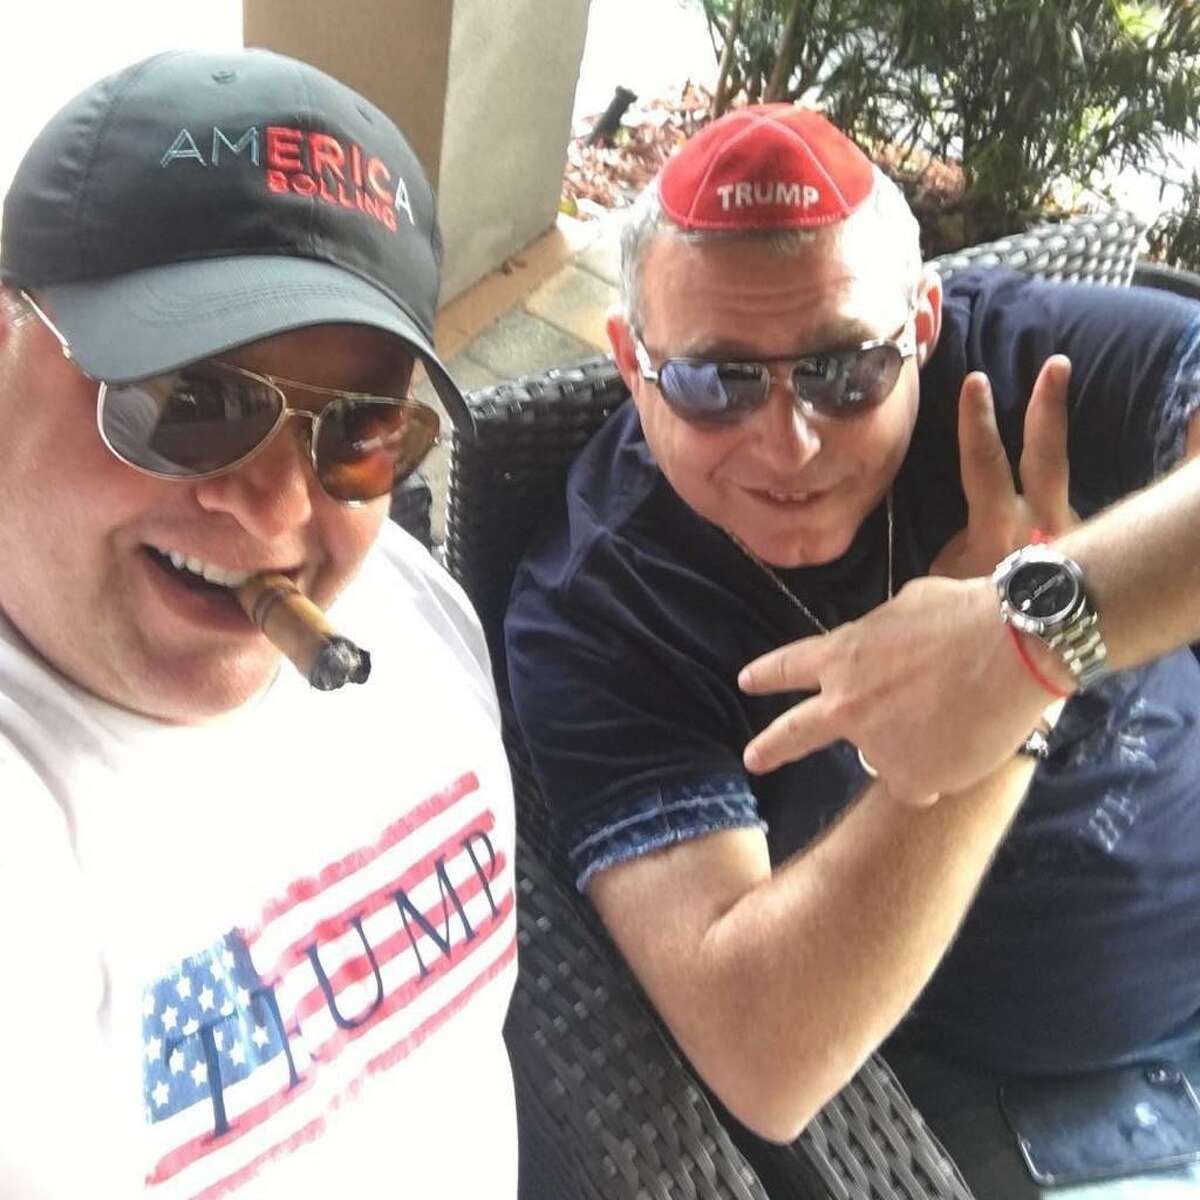 Robert Hyde (left) smokes a cigar with Lev Parnas (right) in this un-dated photo sent by Hyde to Hearst Connecticut Media. Hyde has filed paperwork to run for U.S. Senate in 2022.